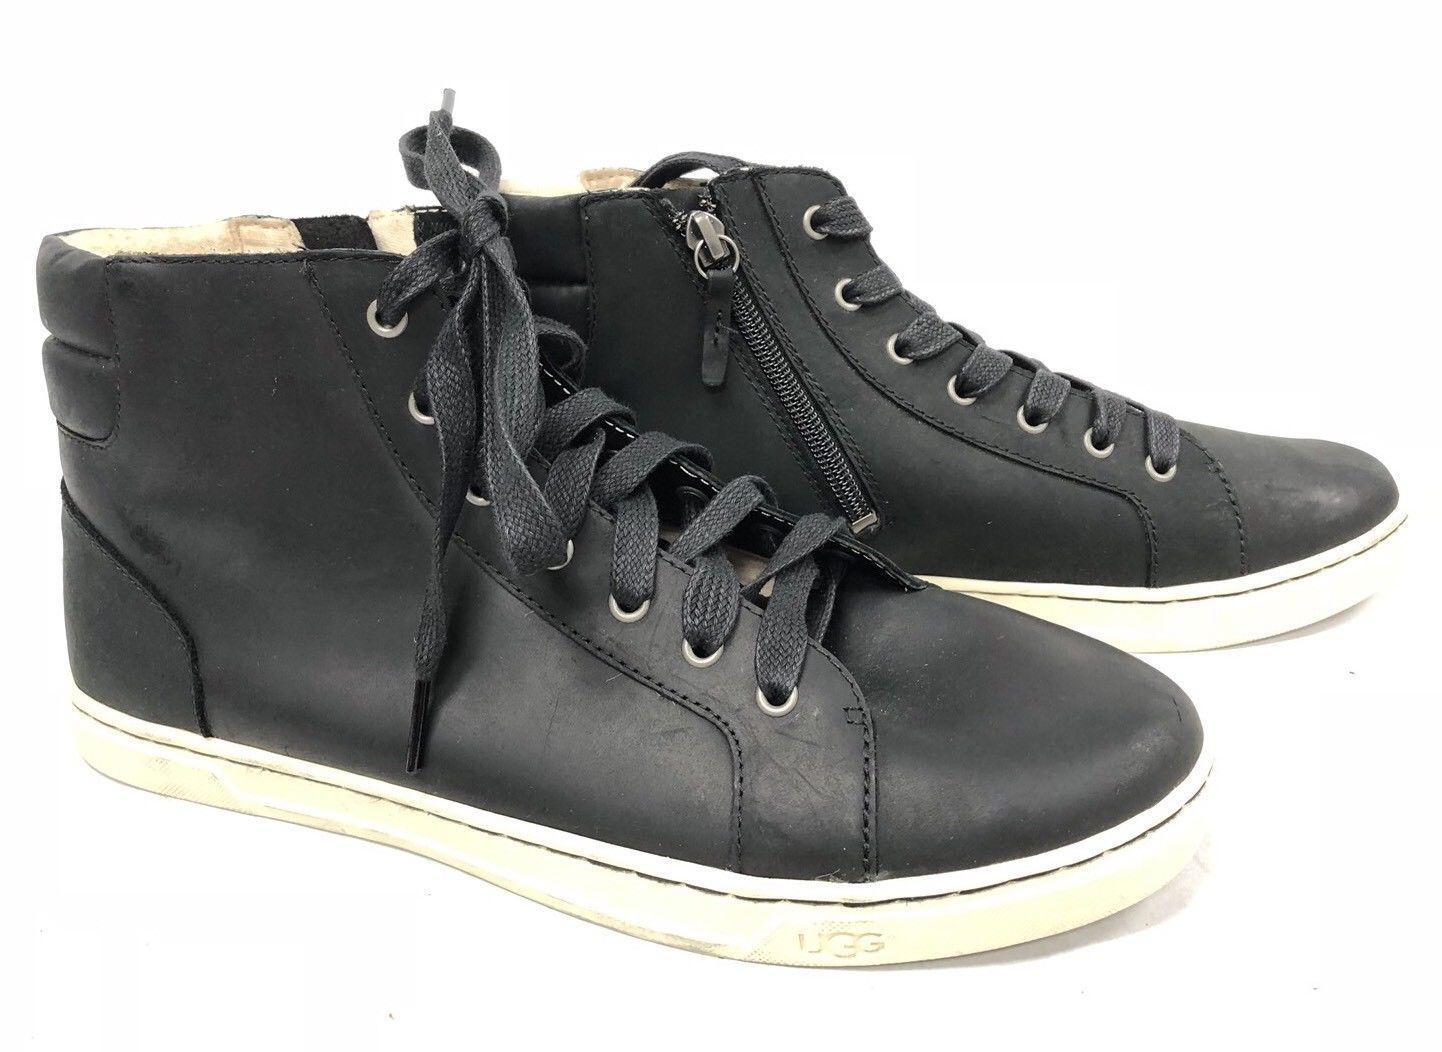 Ugg Australia Womens Black Gradie Ankle Sneaker High Top Leather Lace Up 1014607 - $69.99